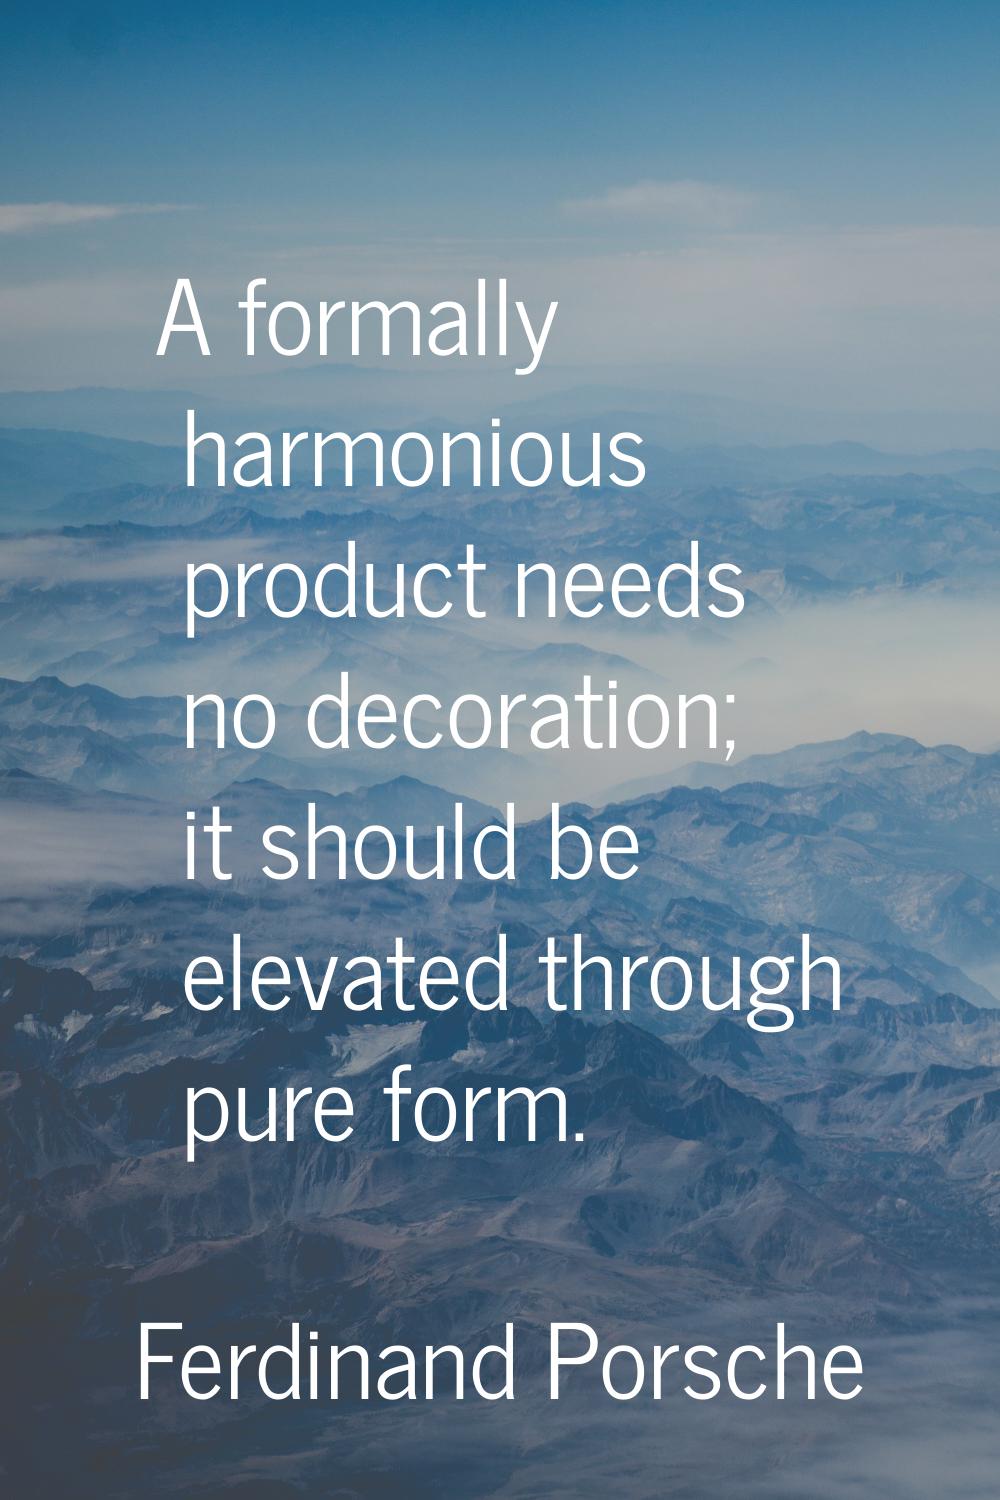 A formally harmonious product needs no decoration; it should be elevated through pure form.